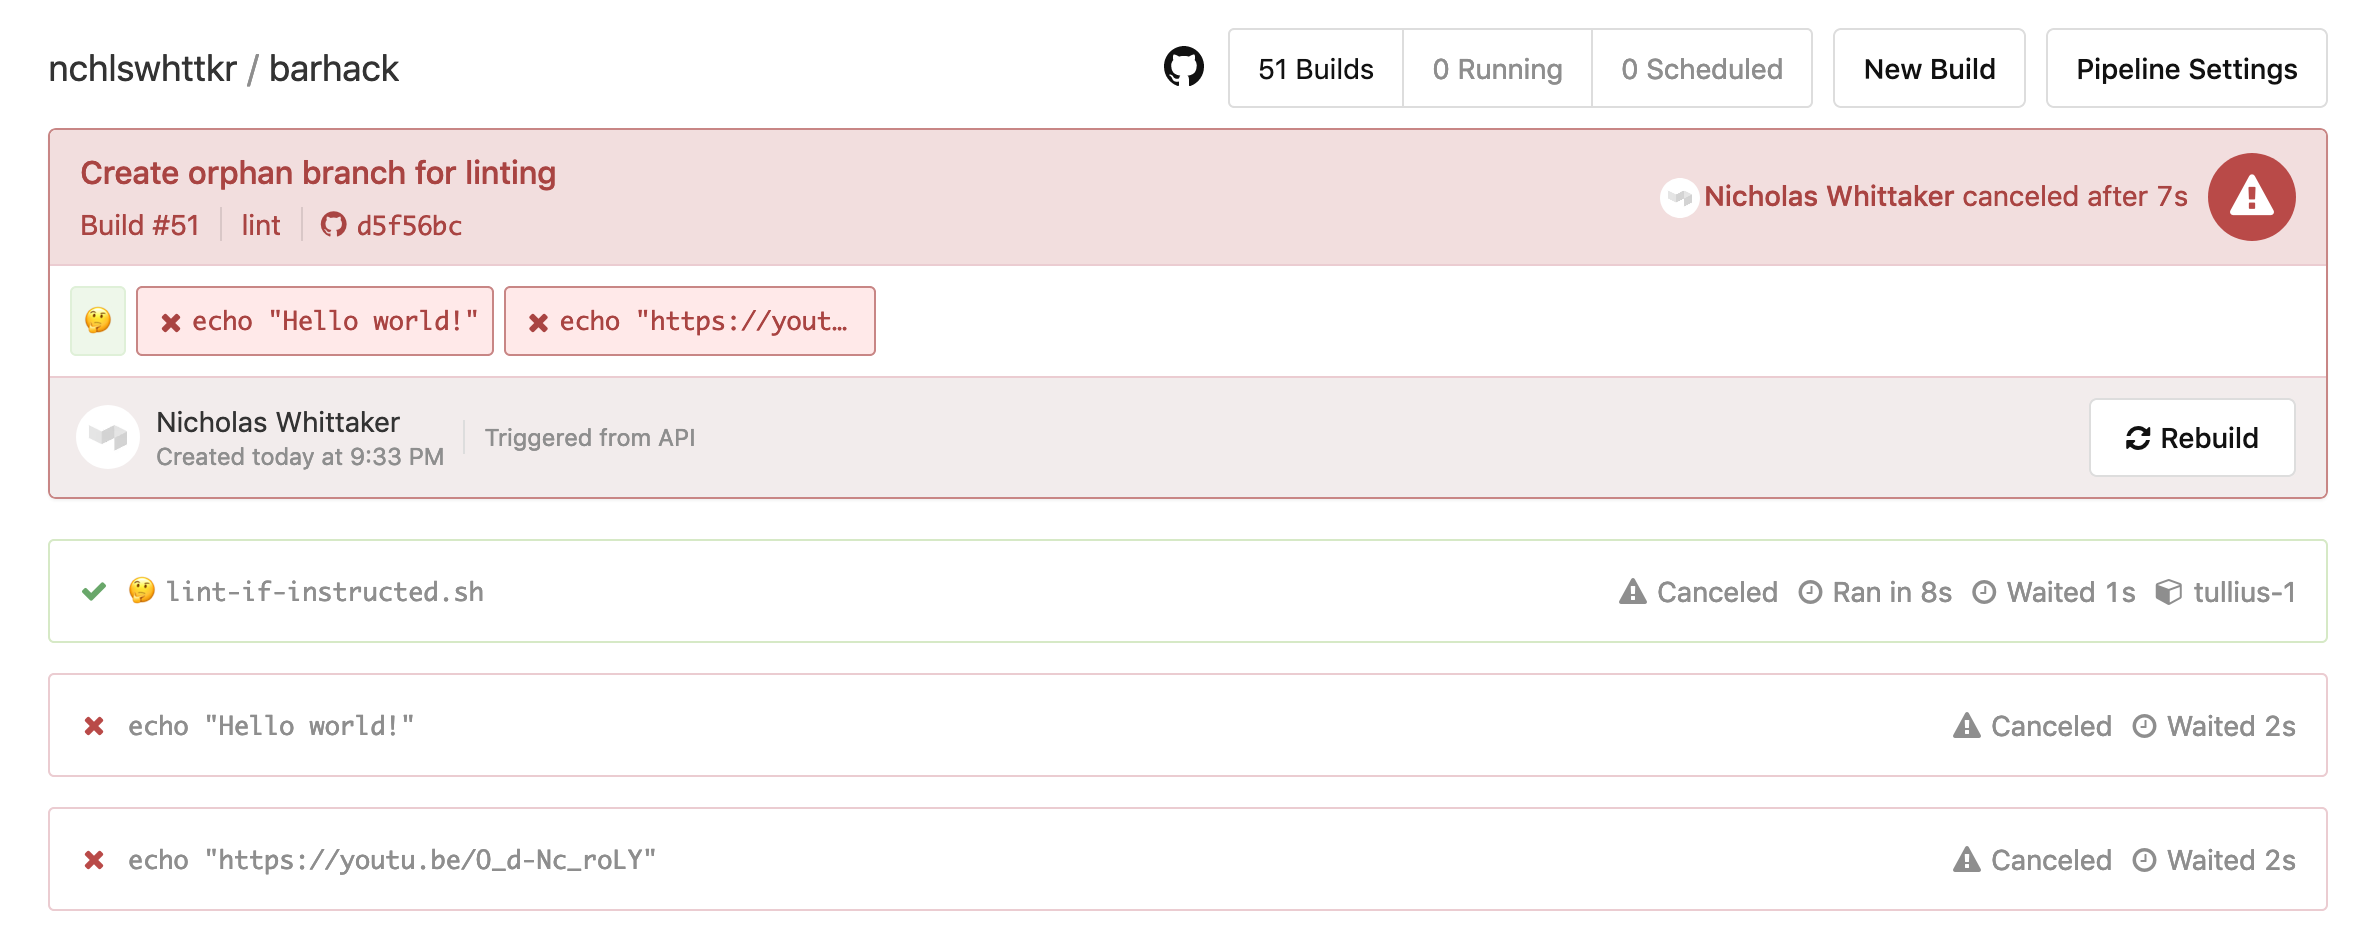 A build in Buildkite, where the pipeline upload script has run successfully and cancelled the rest of the build